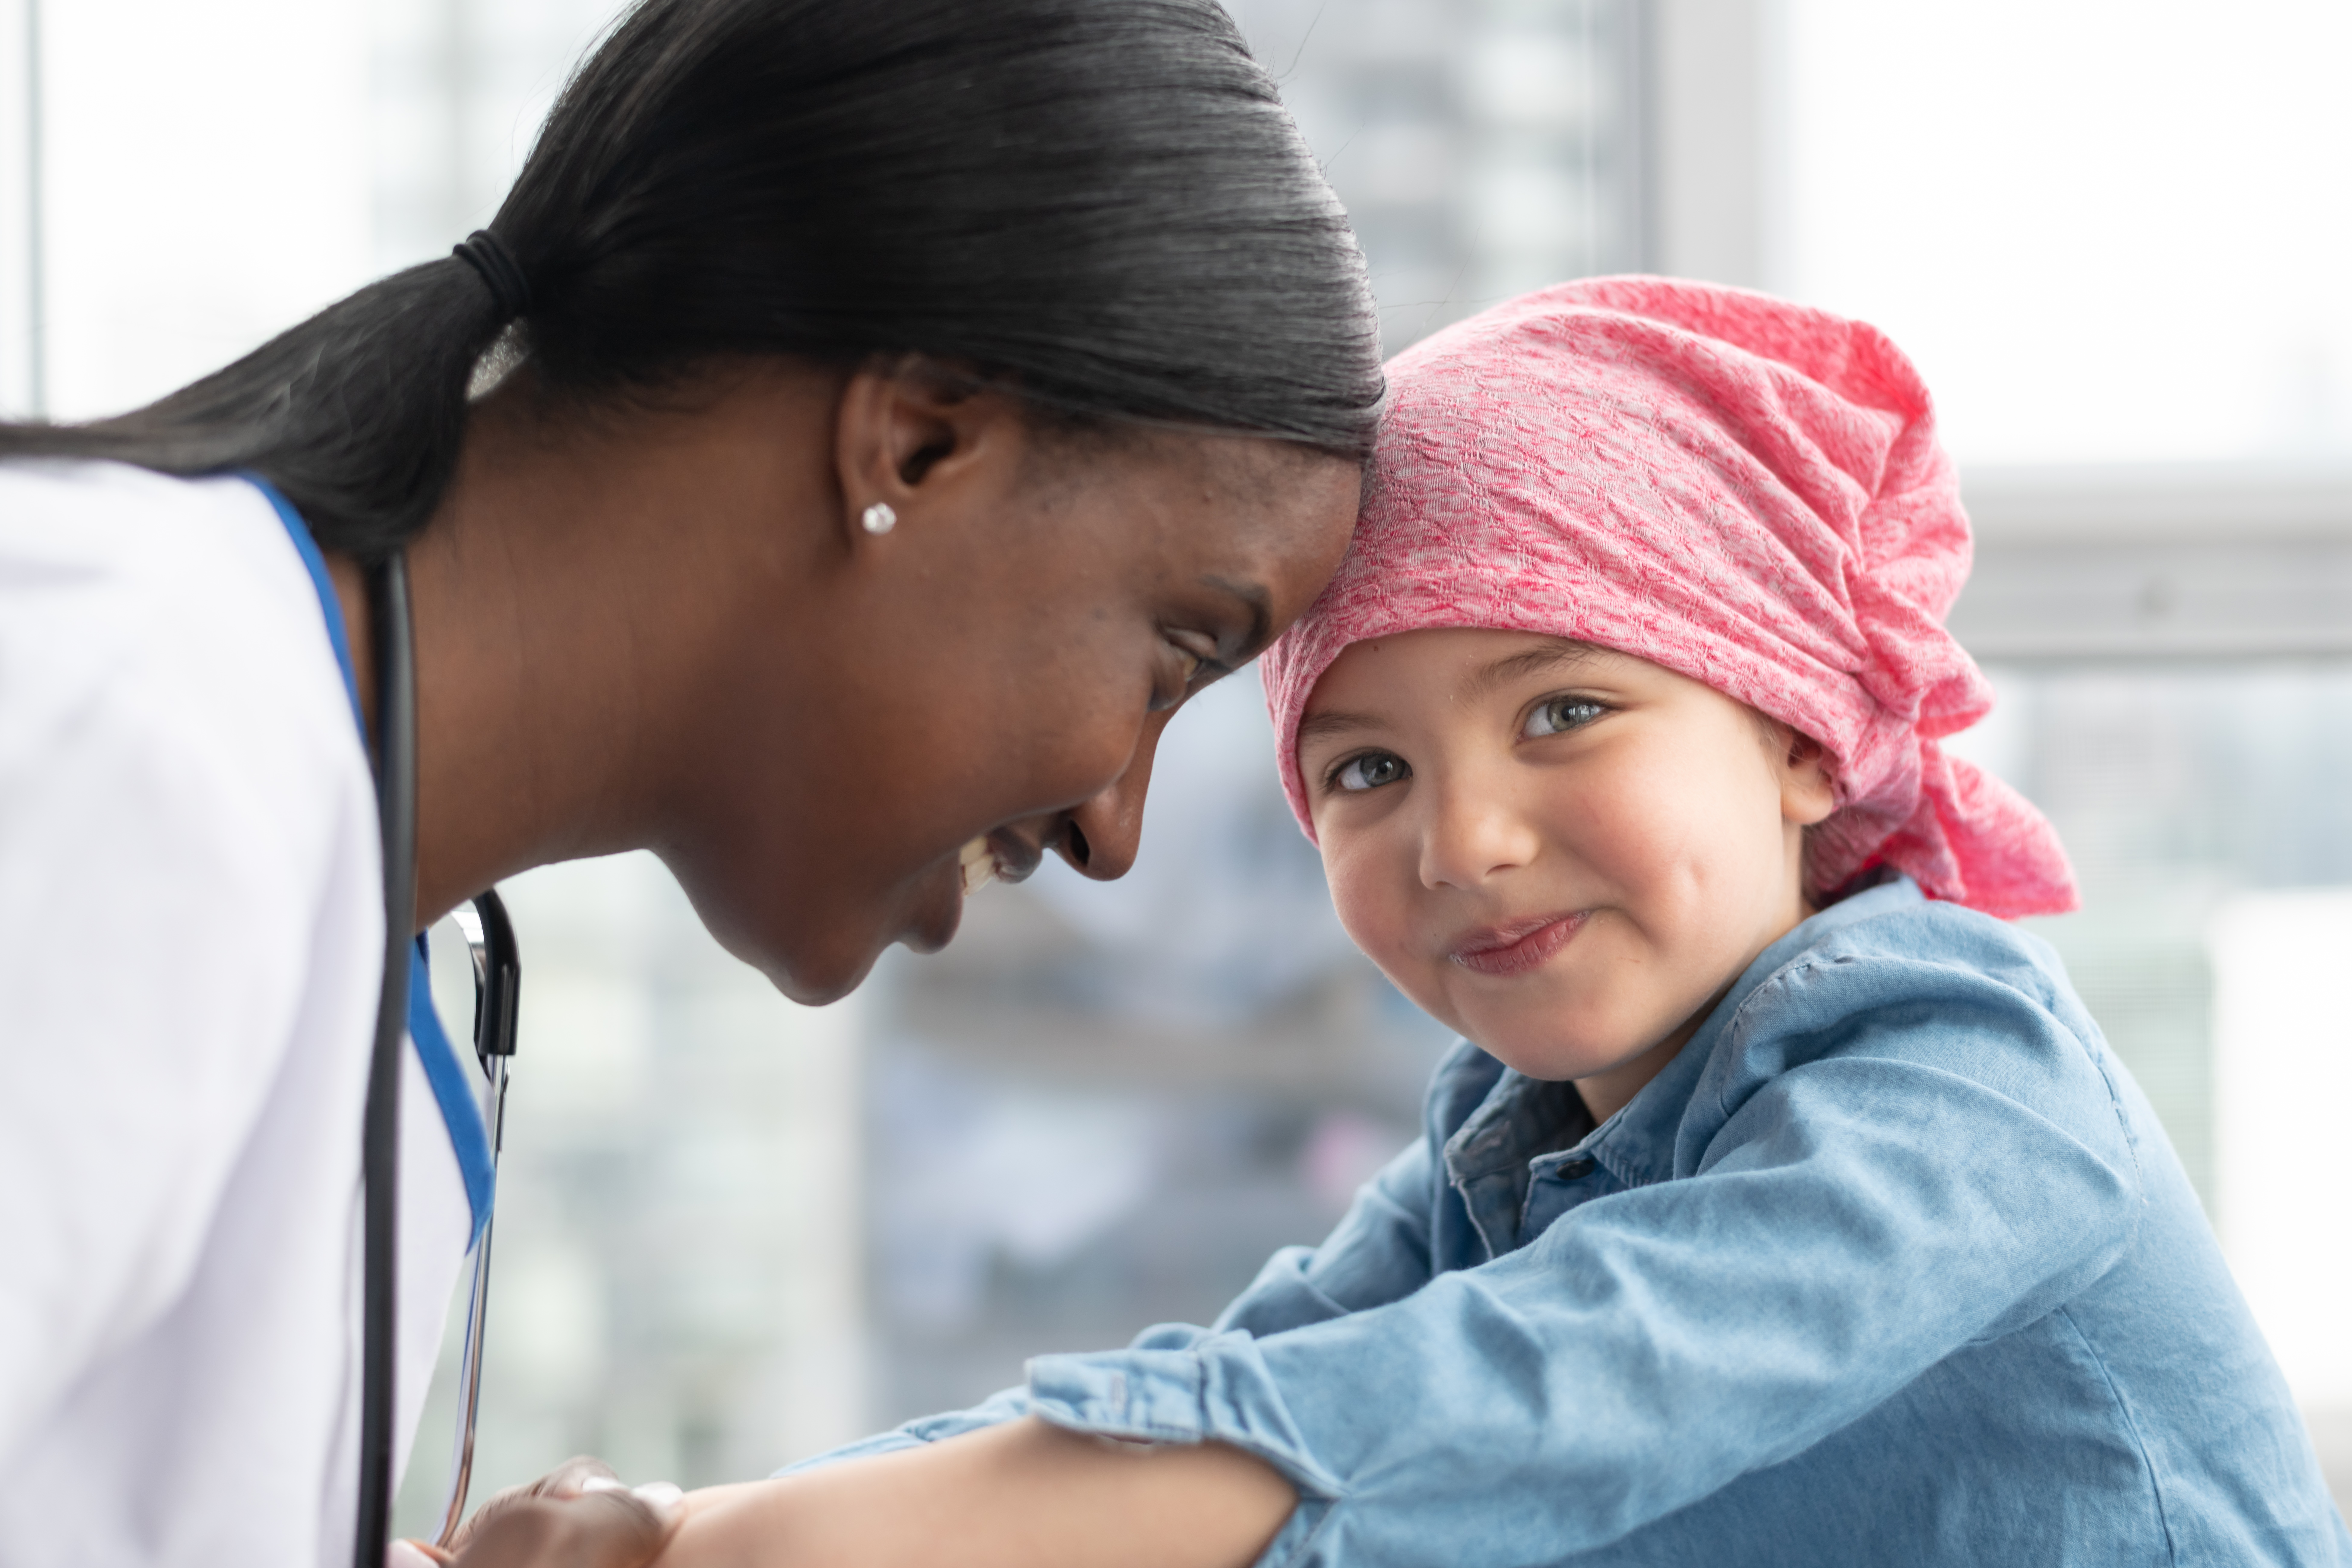 A cute elementary age girl with cancer is wearing a pink scarf on her head. She is at a medical appointment. The female doctor of African descent is holding the child's hands, providing comfort and support. The child is smiling at the camera.